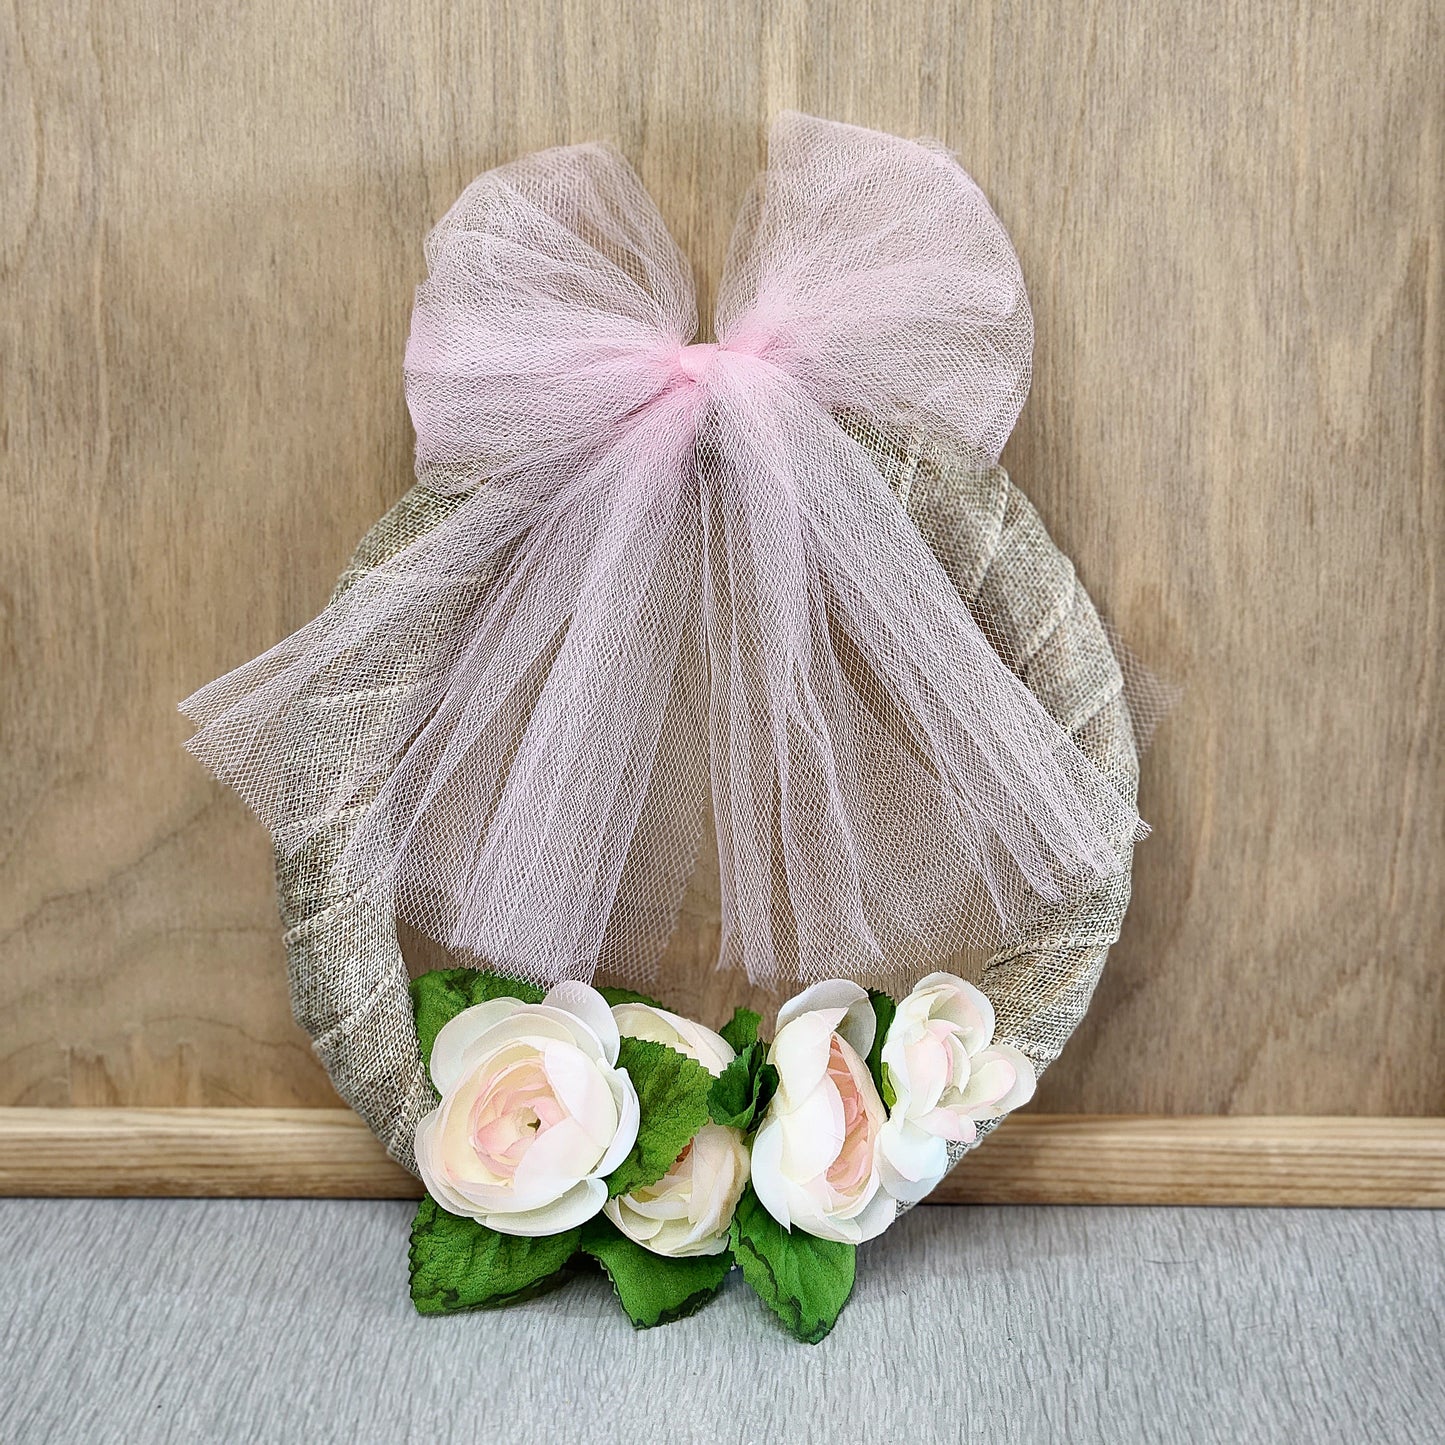 Hand Wrapped Wreaths - Variety